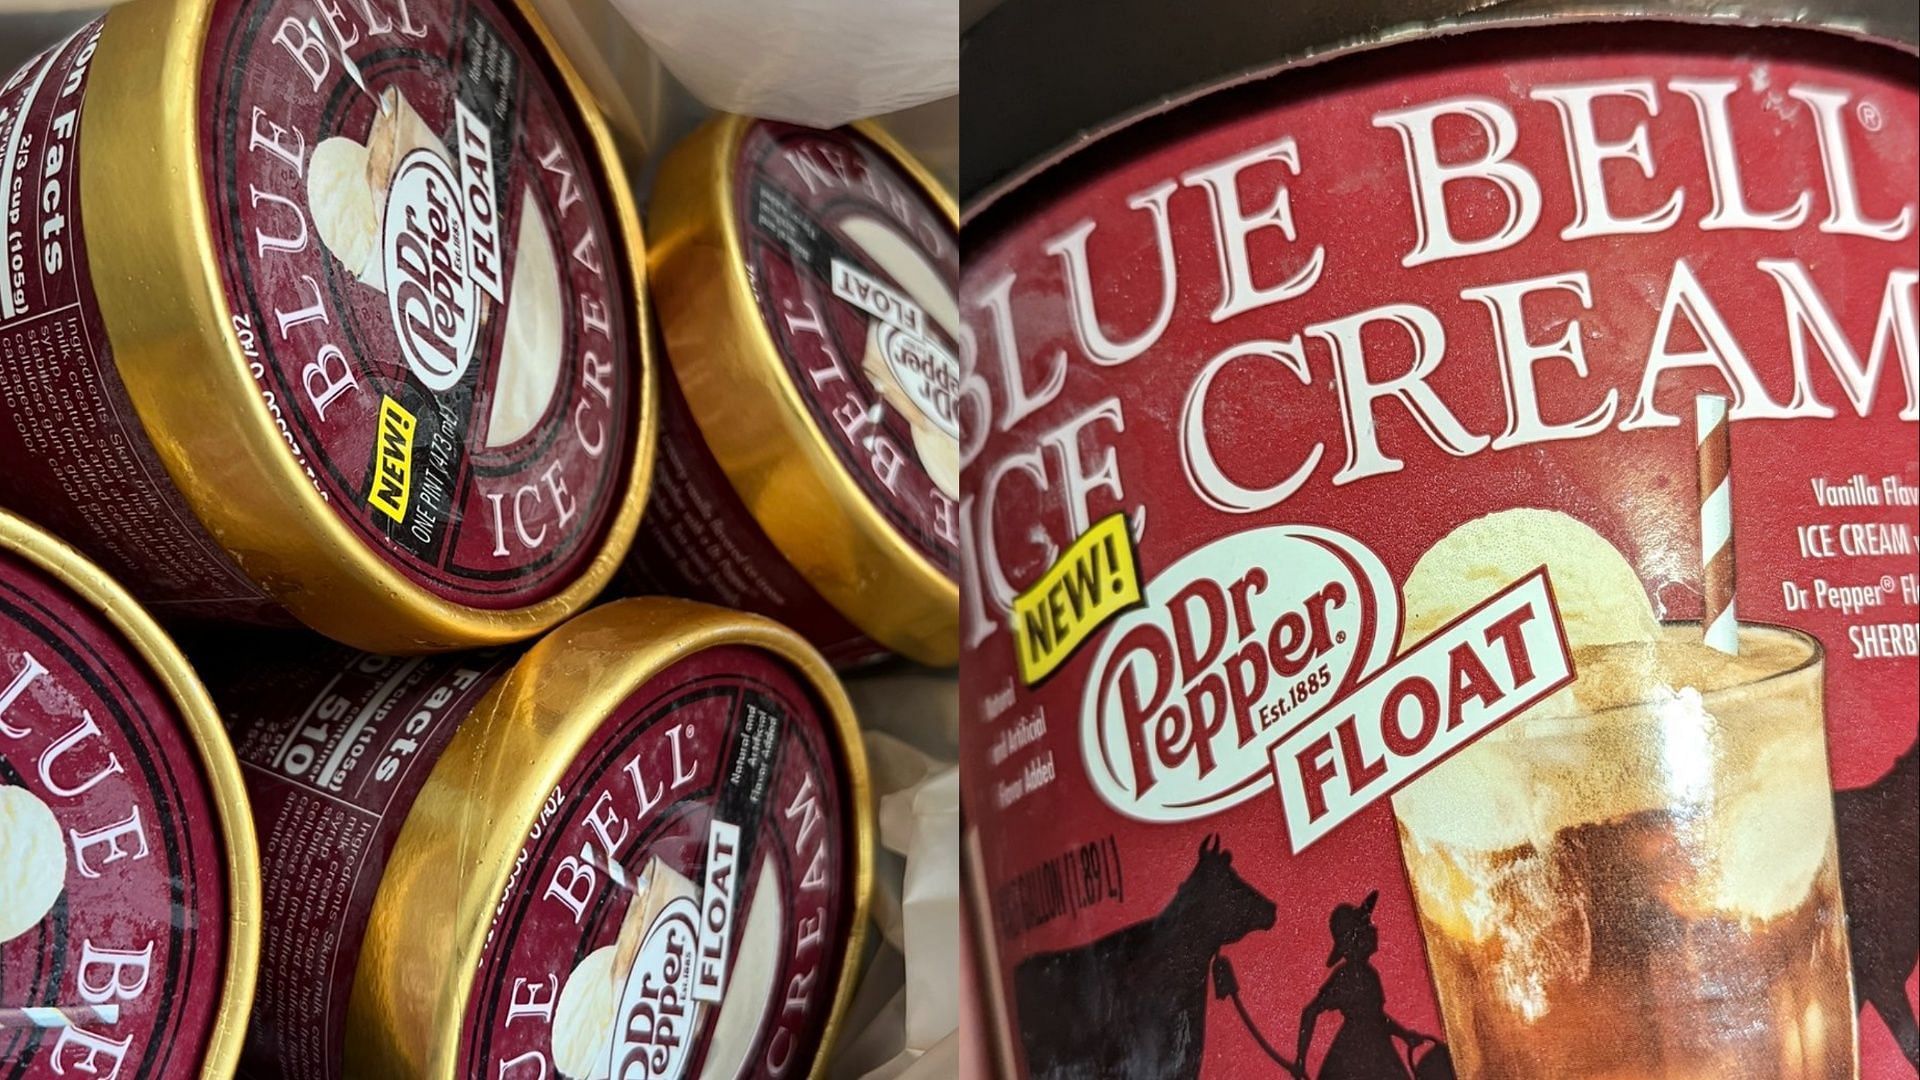 Where to get Blue Bell's new Dr Pepper float ice cream in Arizona